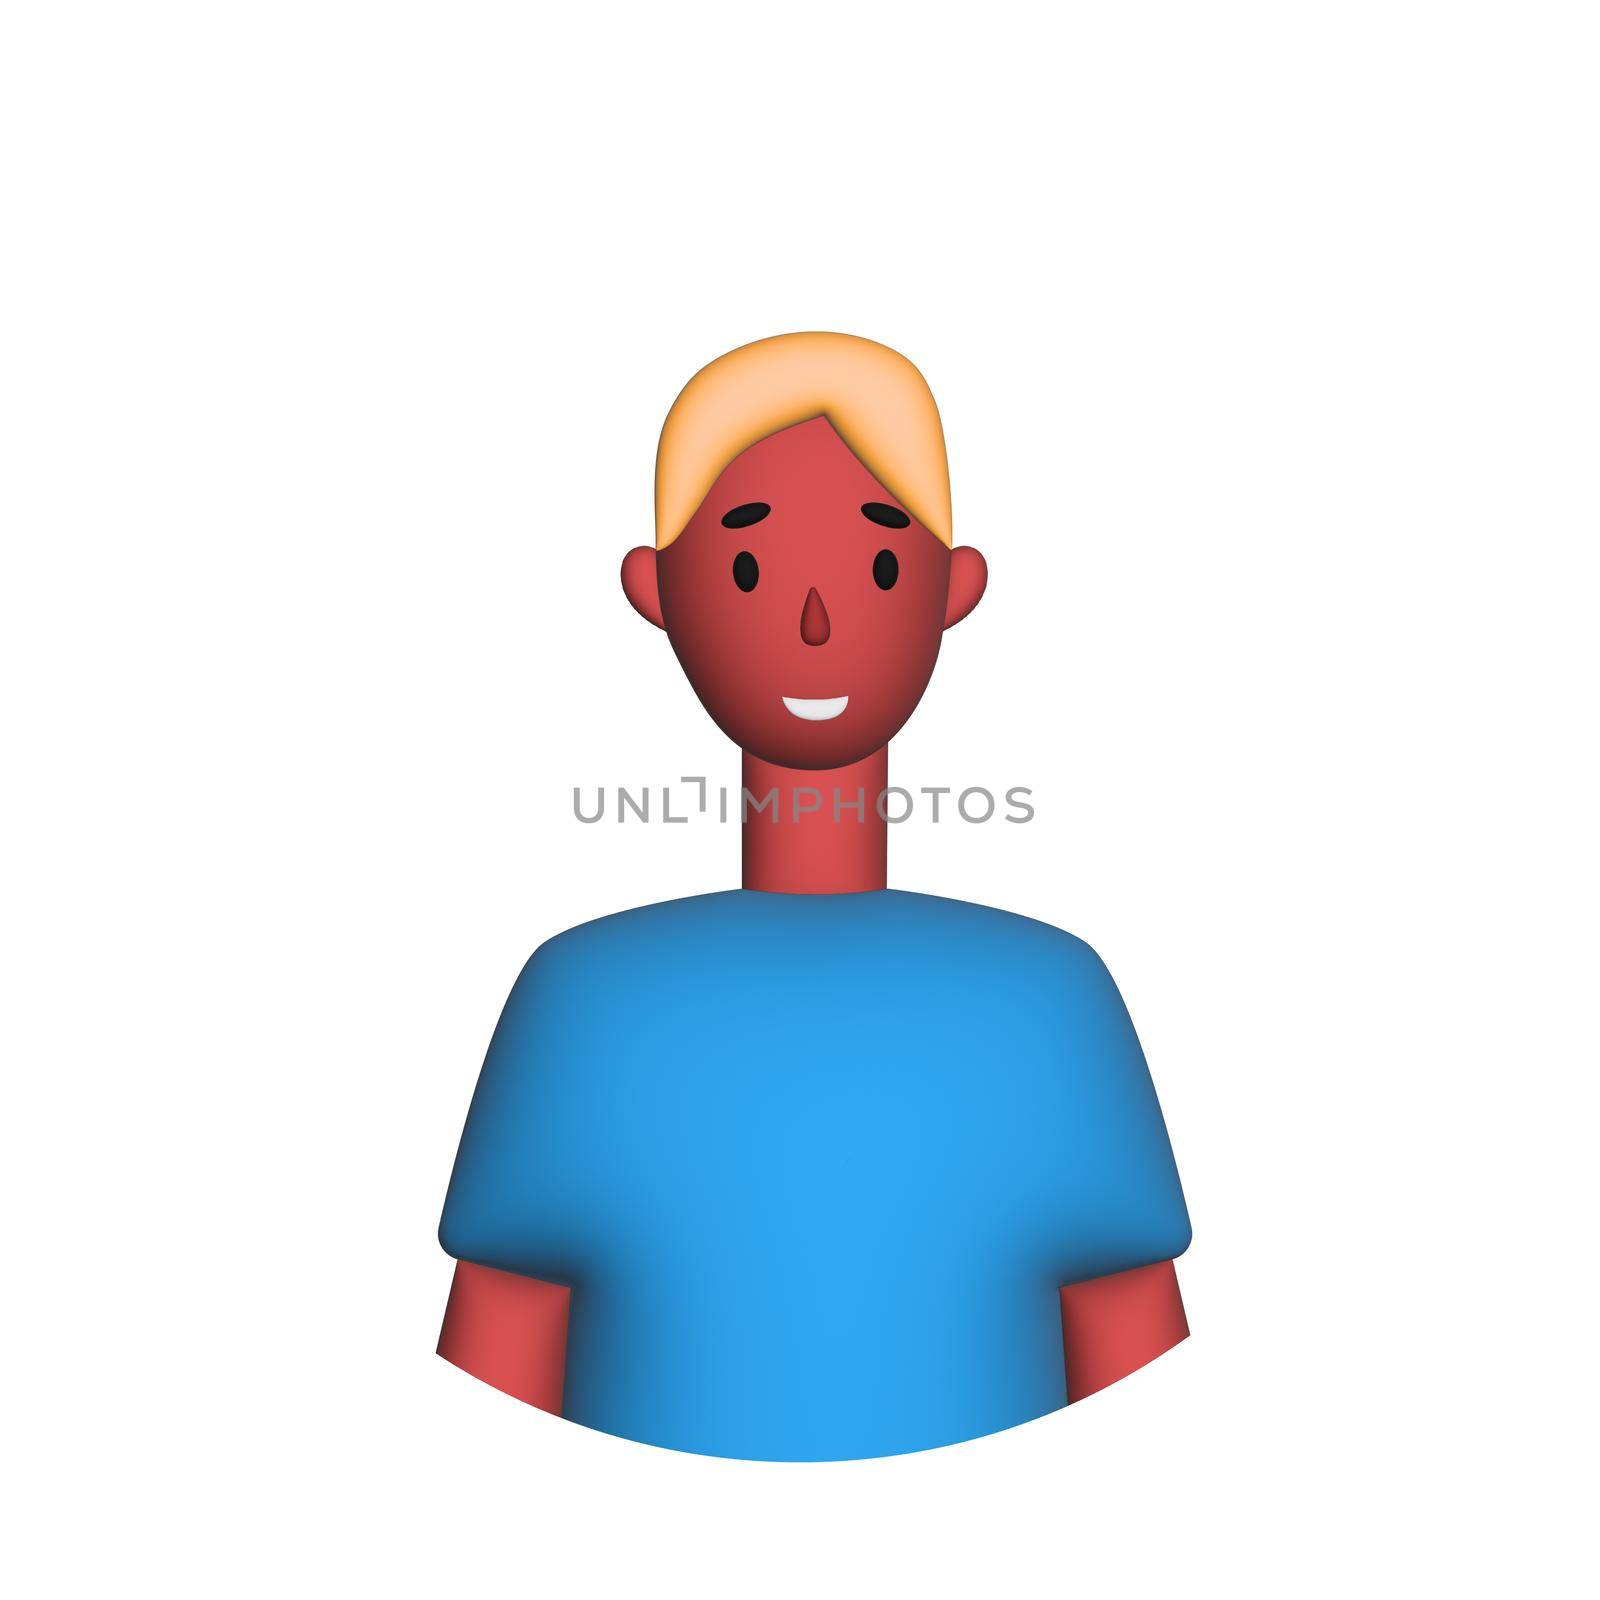 Web icon man, middle-aged man with blond hair by BEMPhoto